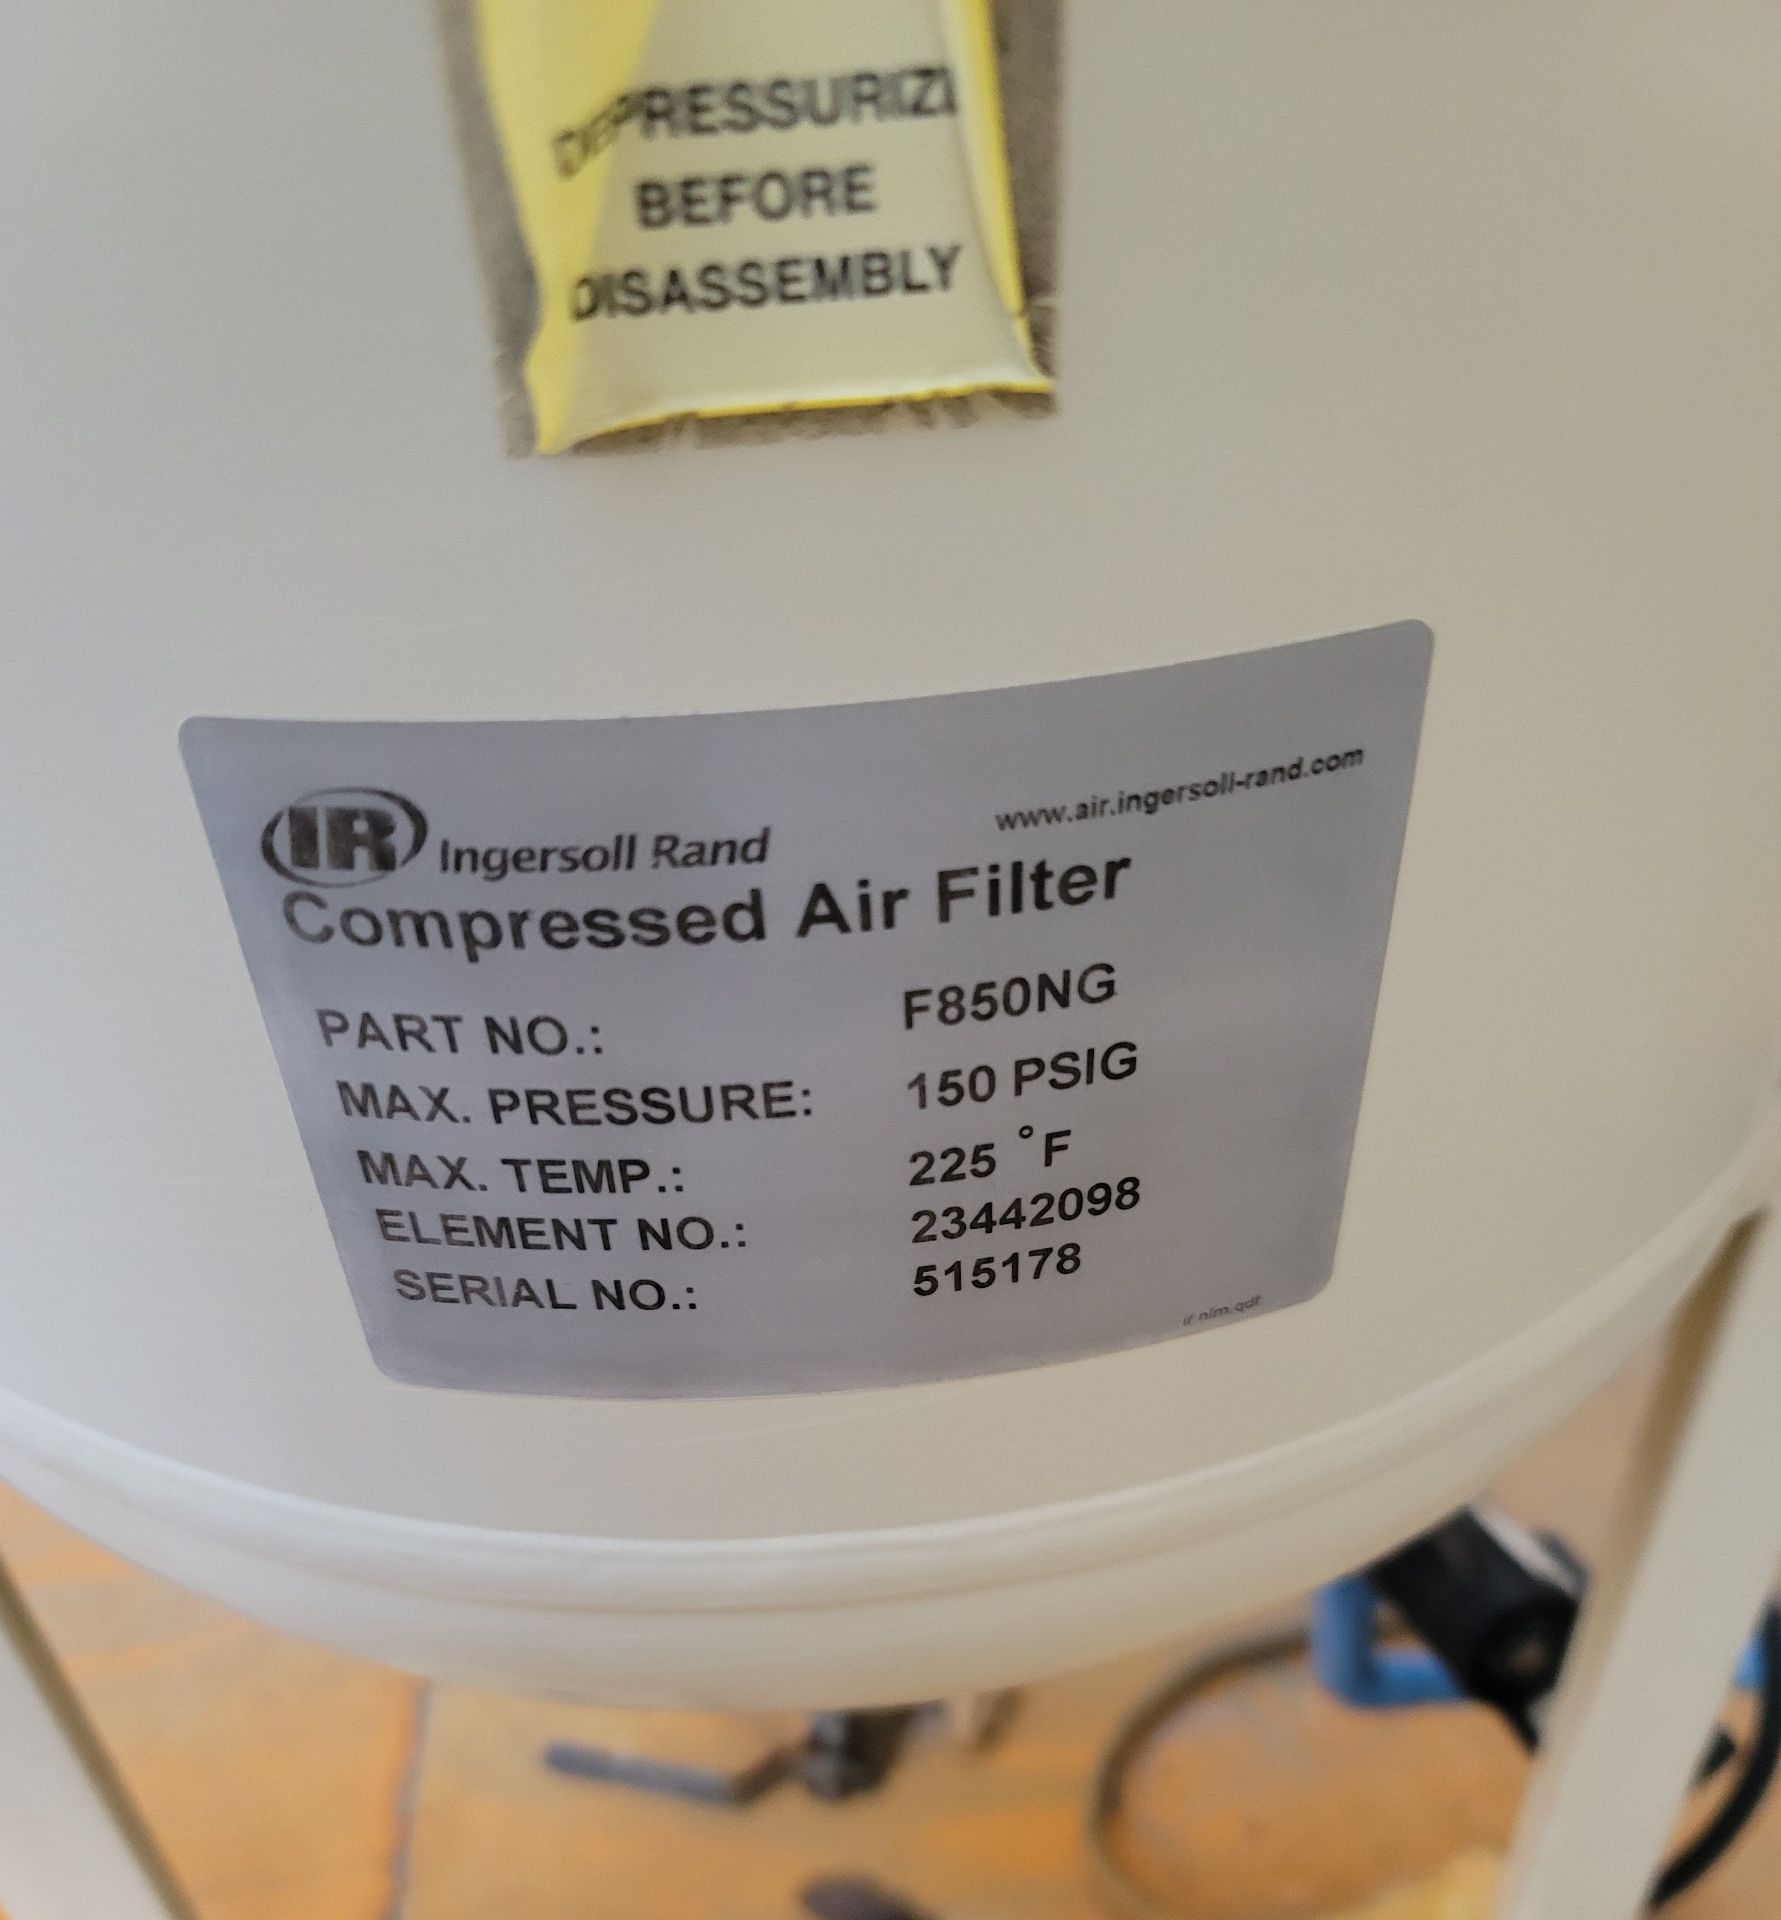 INGERSOLL RAND COMPRESSED AIR FILTER, PART NO. F850NG, S/N 515178, (OUTSIDE BUILDING 69) - Image 2 of 2